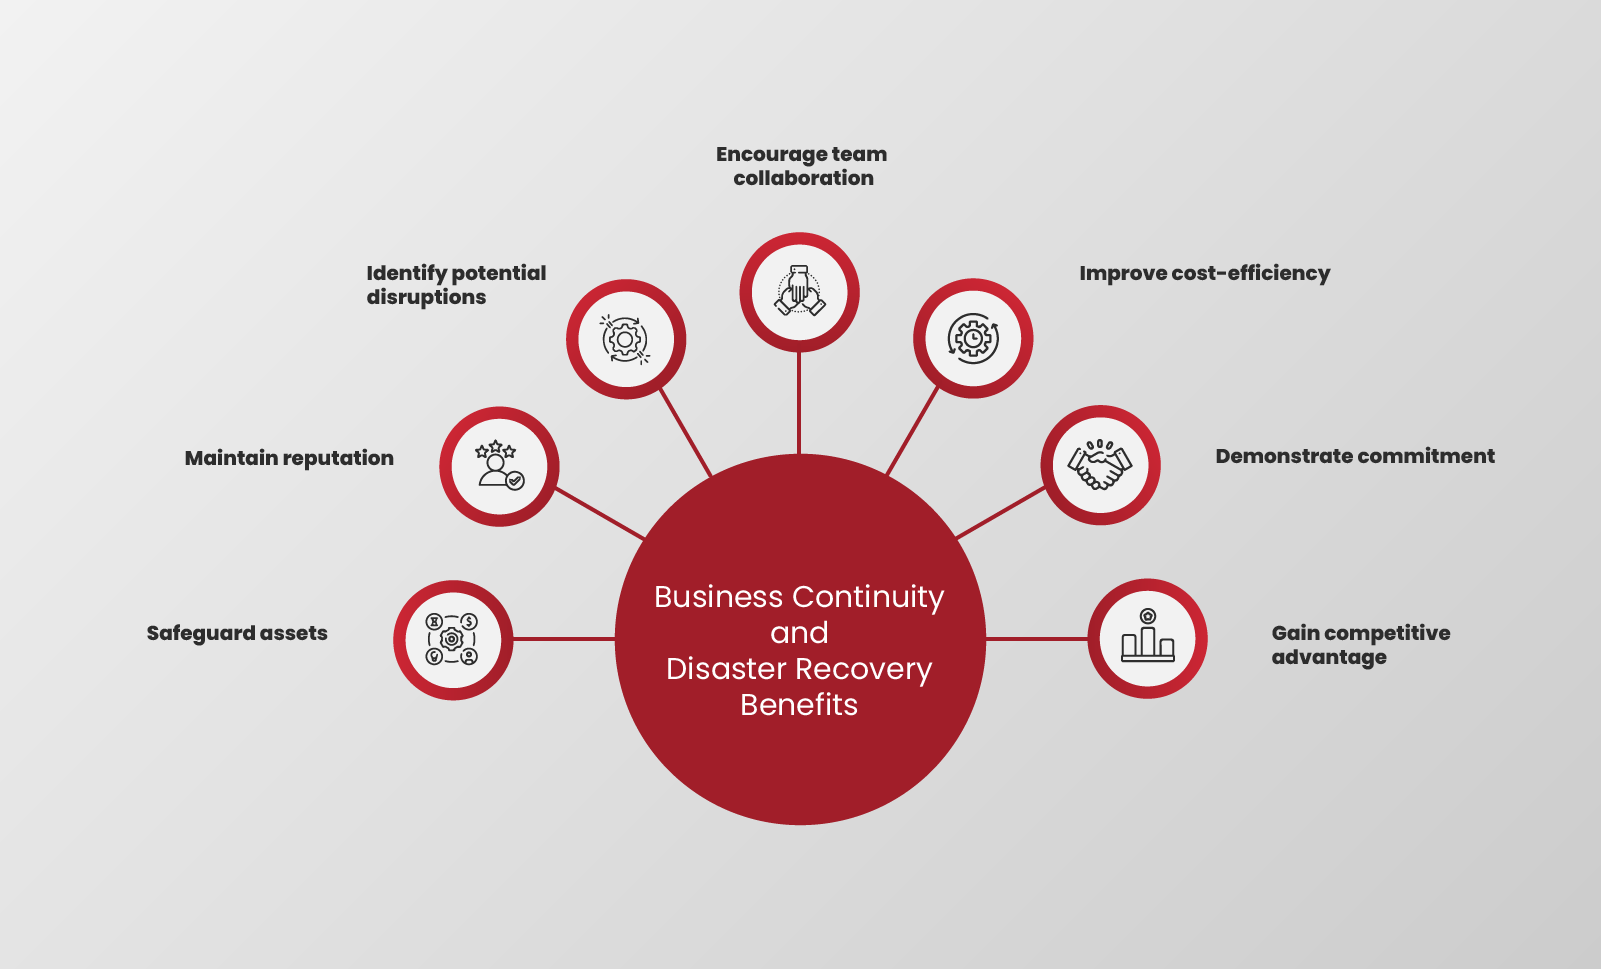 Business Continuity and Disaster Recovery benefits